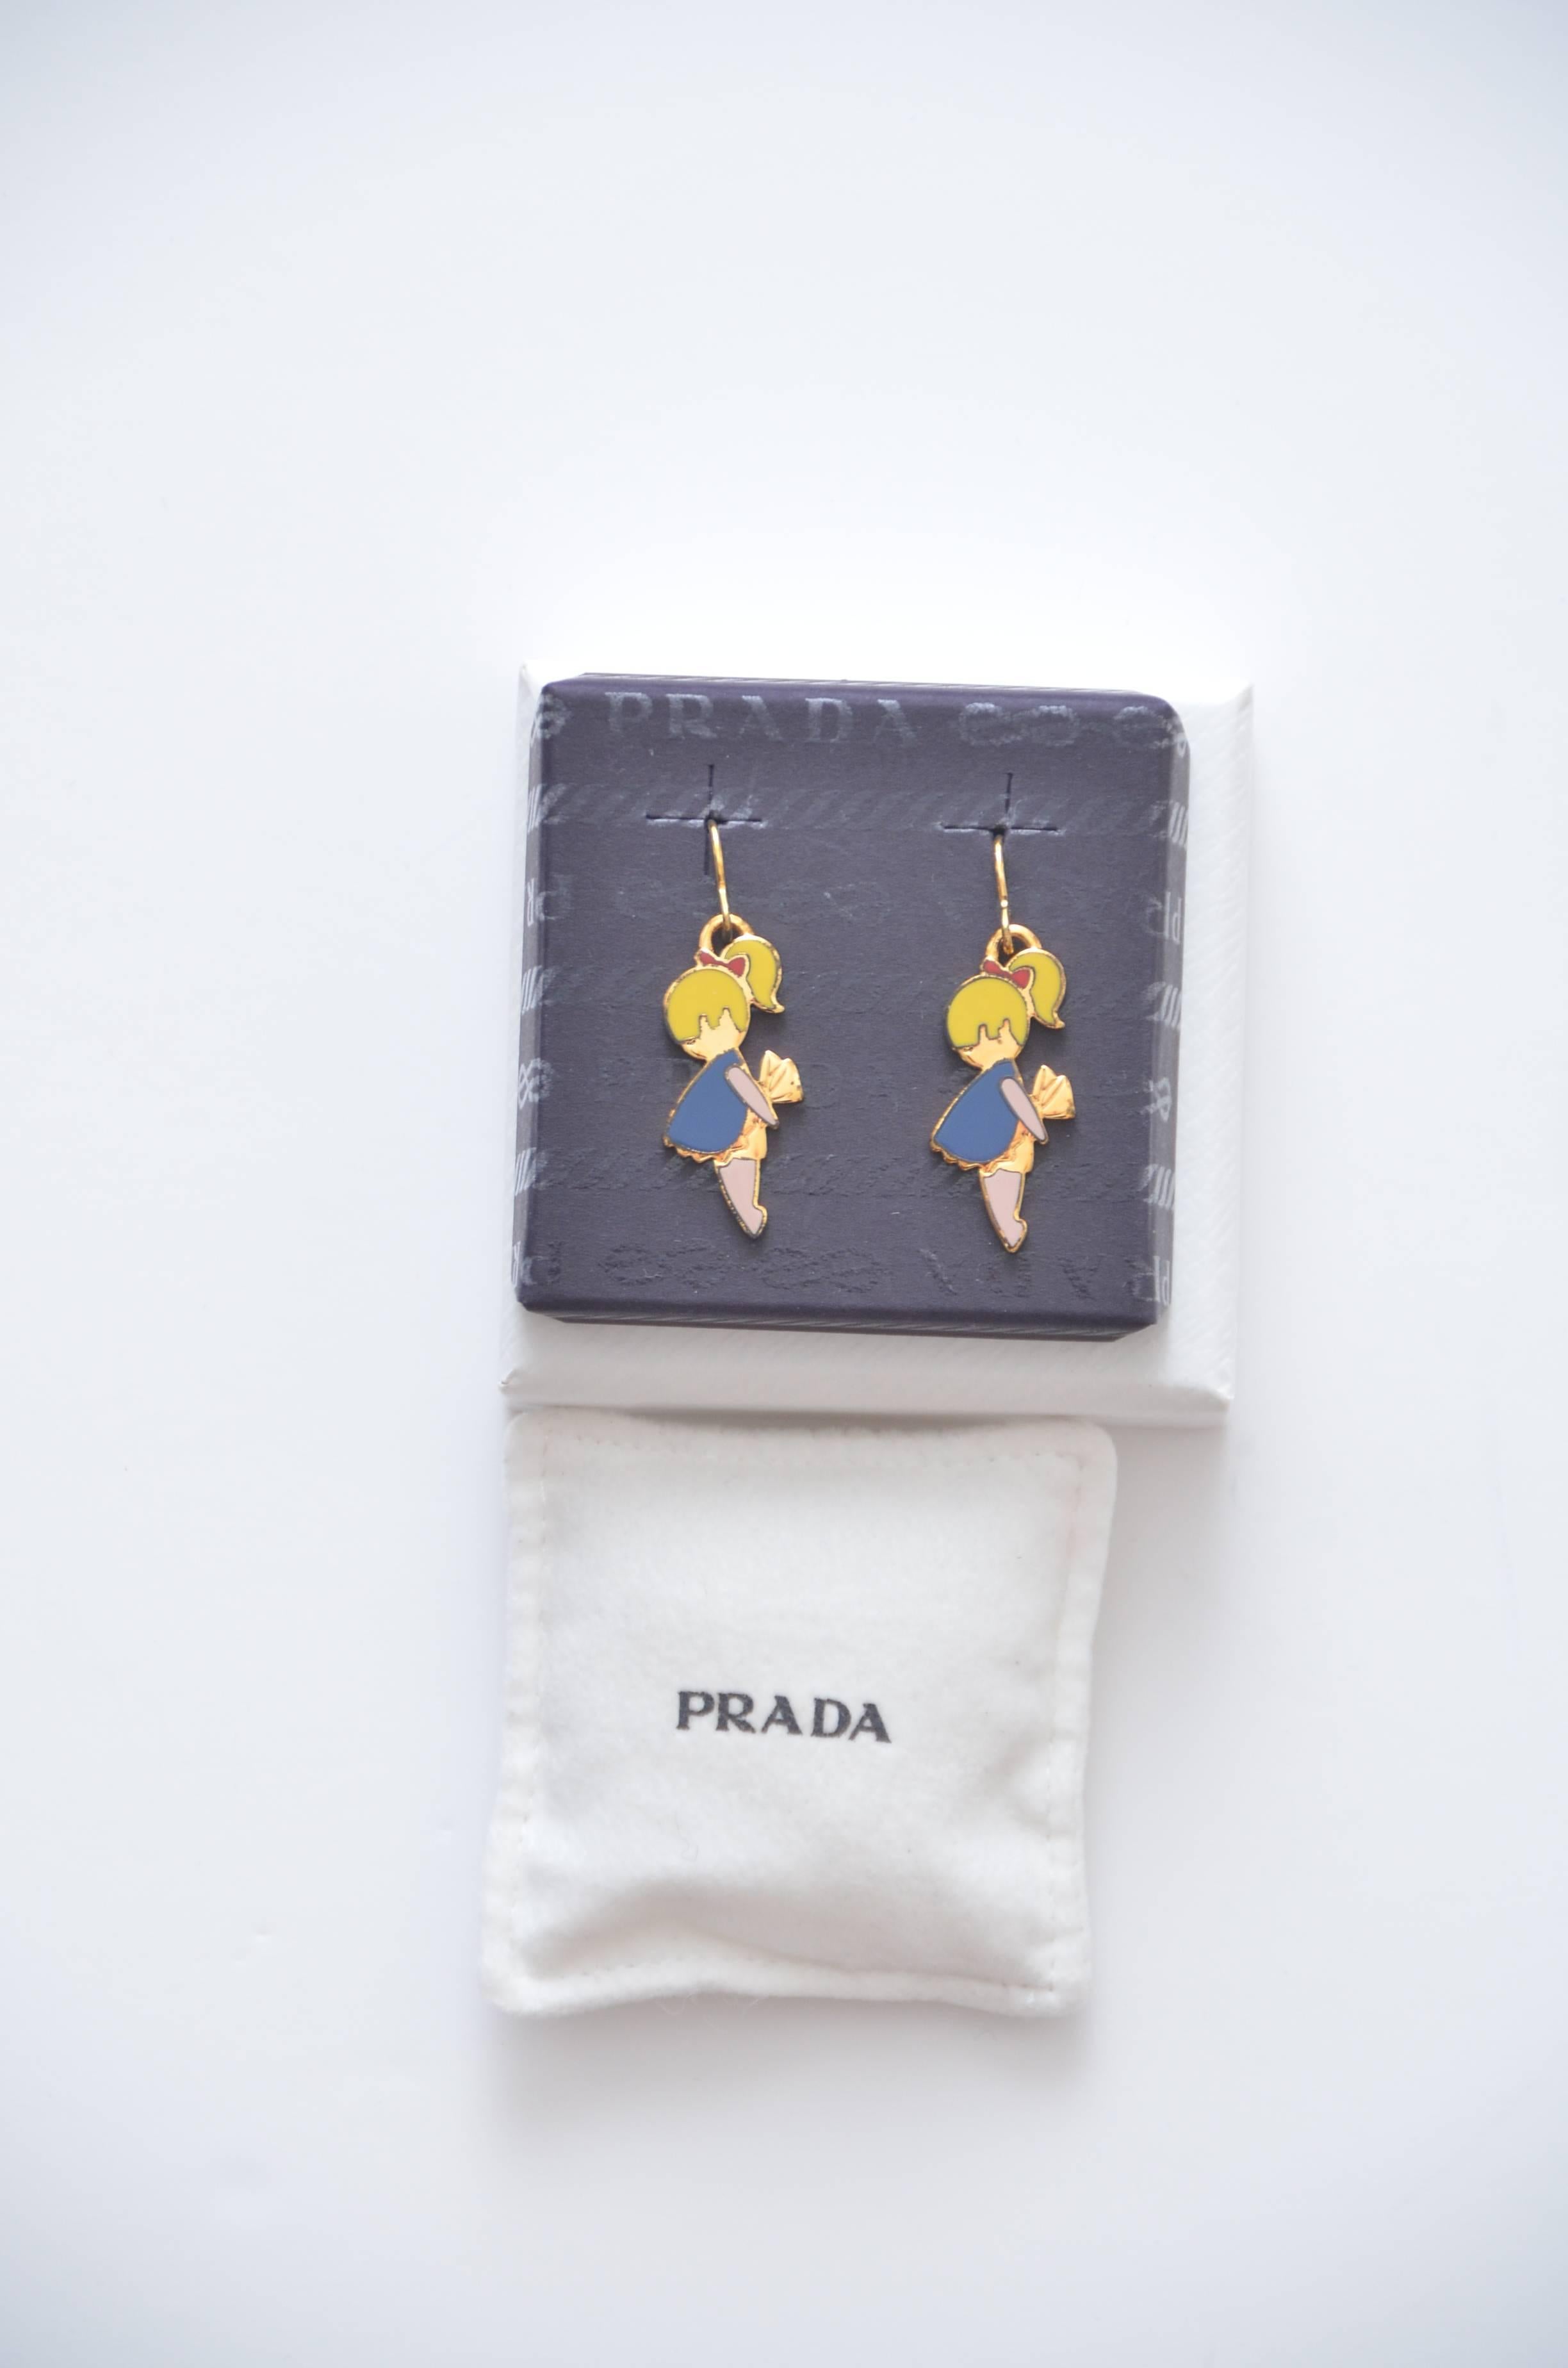 Prada earrings.
Purchased 9 years ago and never used.
Showing some metal discoloration on the back.
Stamped PRADA.
Come with original box.

Final Sale.